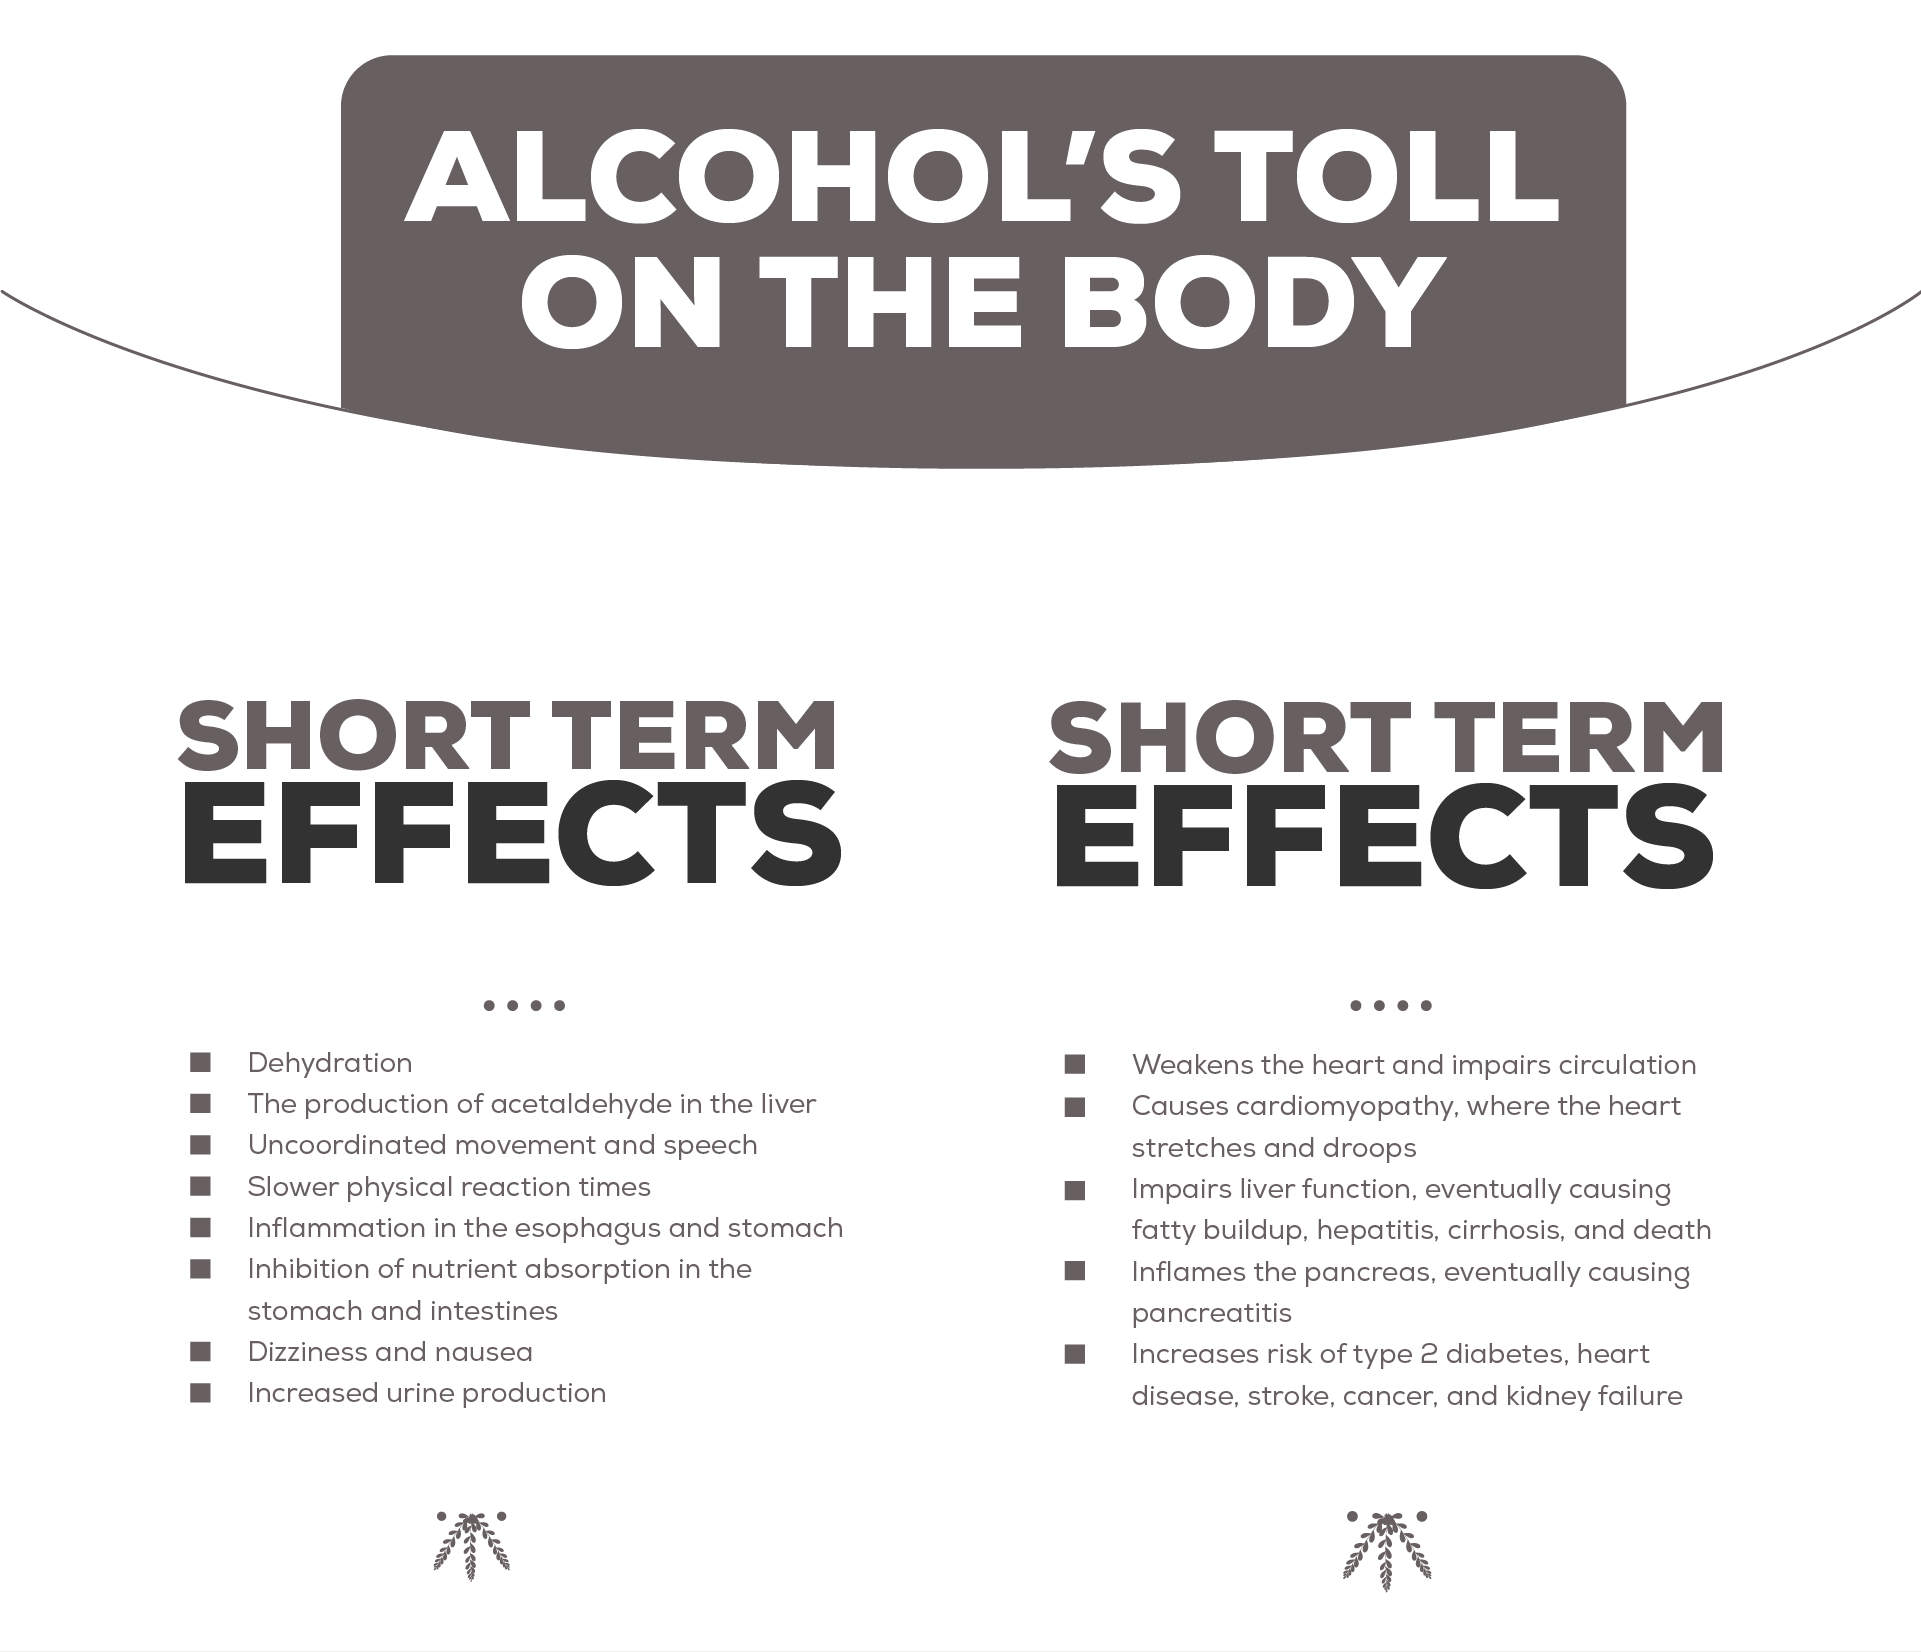 Alcohol's Effects on the Body